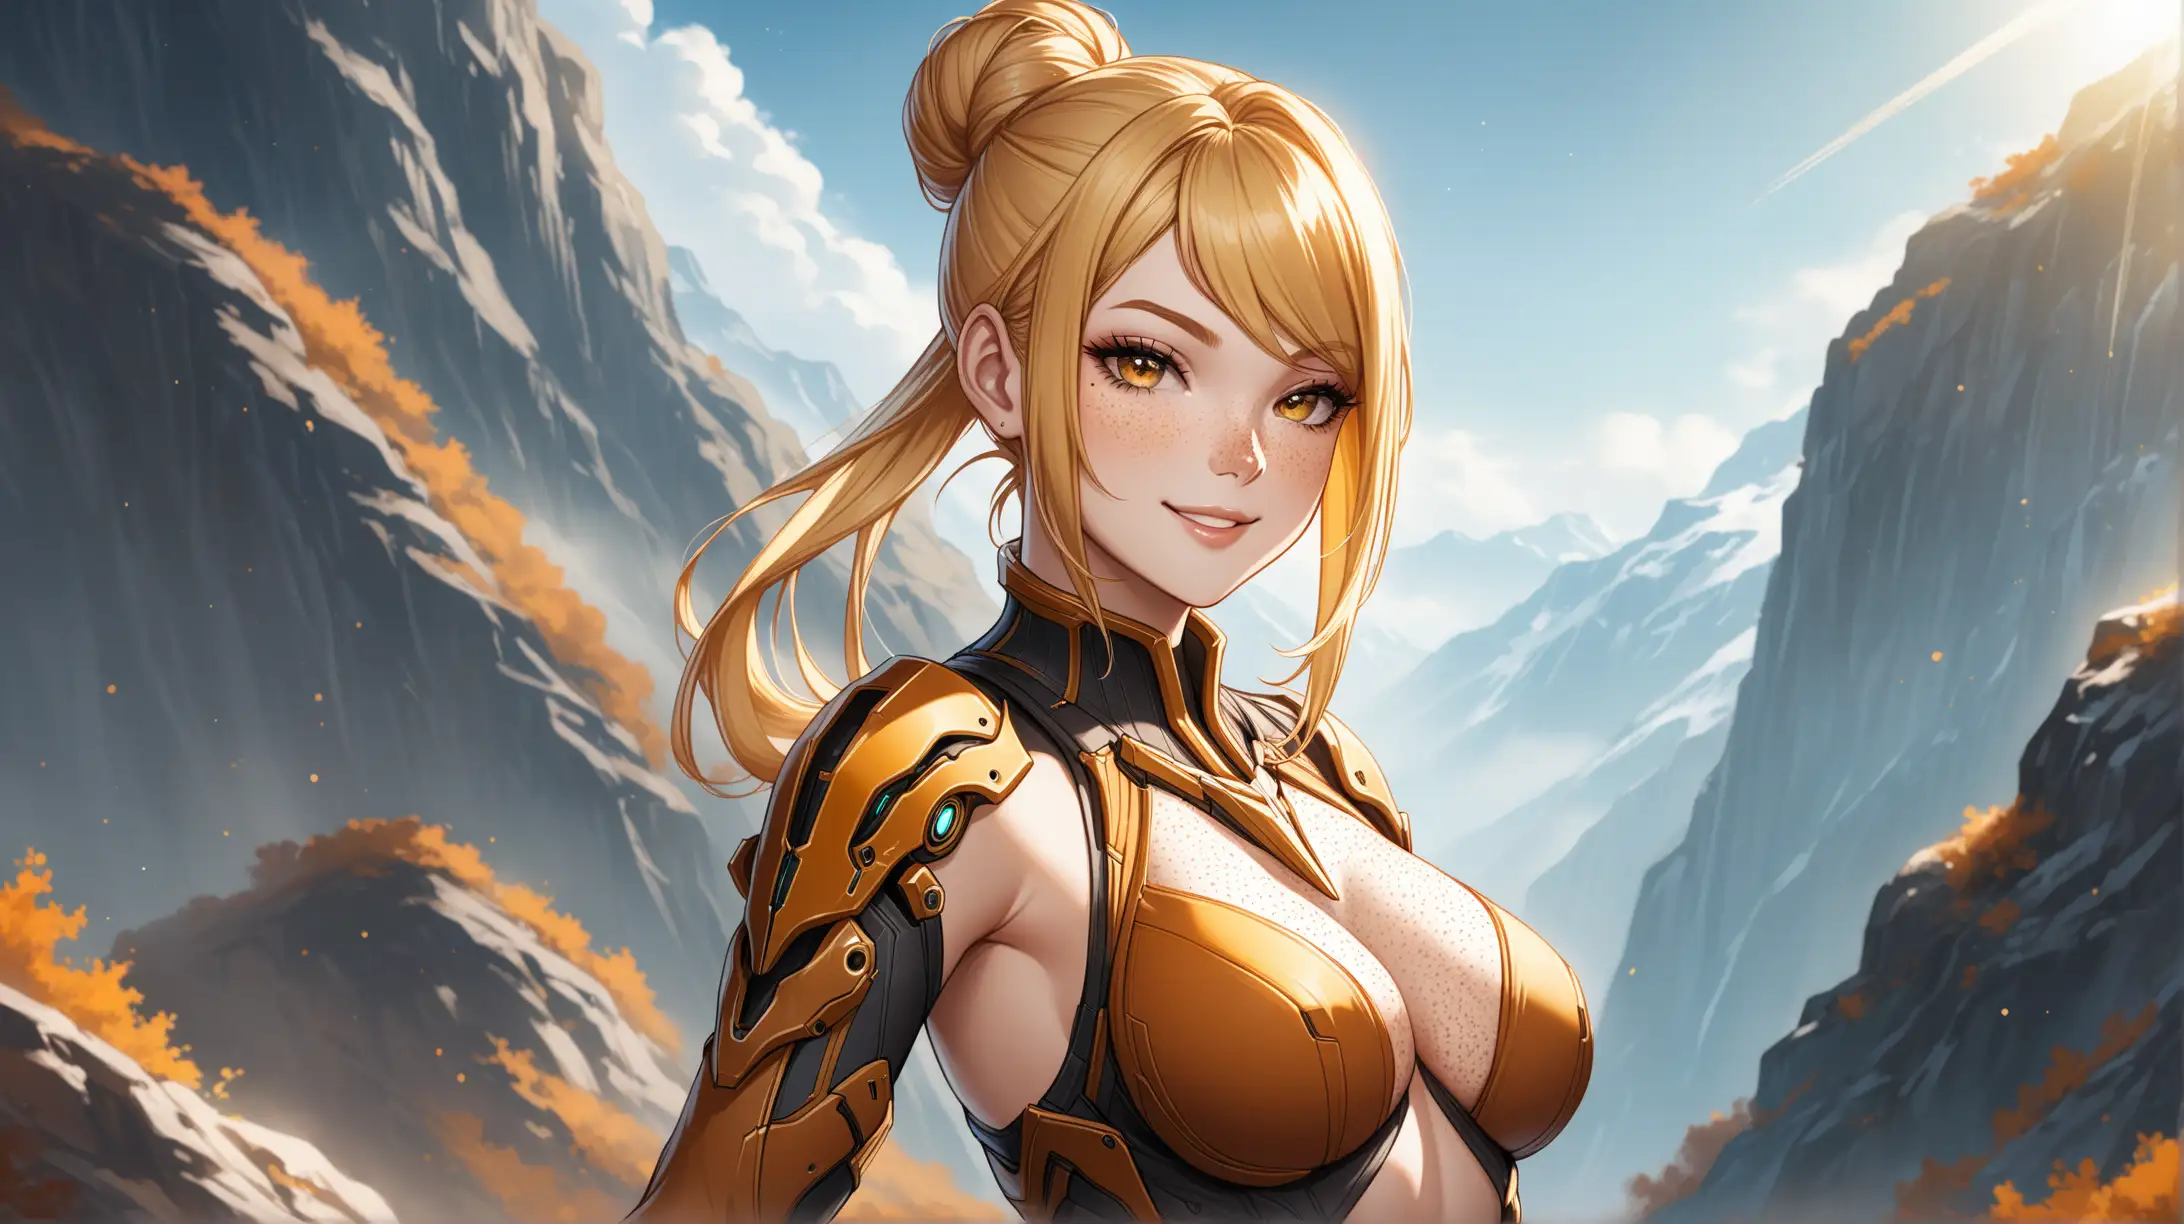 Draw a woman, long blonde hair in a bun, gold eyes, freckles, perky figure, outfit inspired from Warframe, high quality, cowboy shot, outdoors, seductive pose, natural lighting, smiling at the viewer